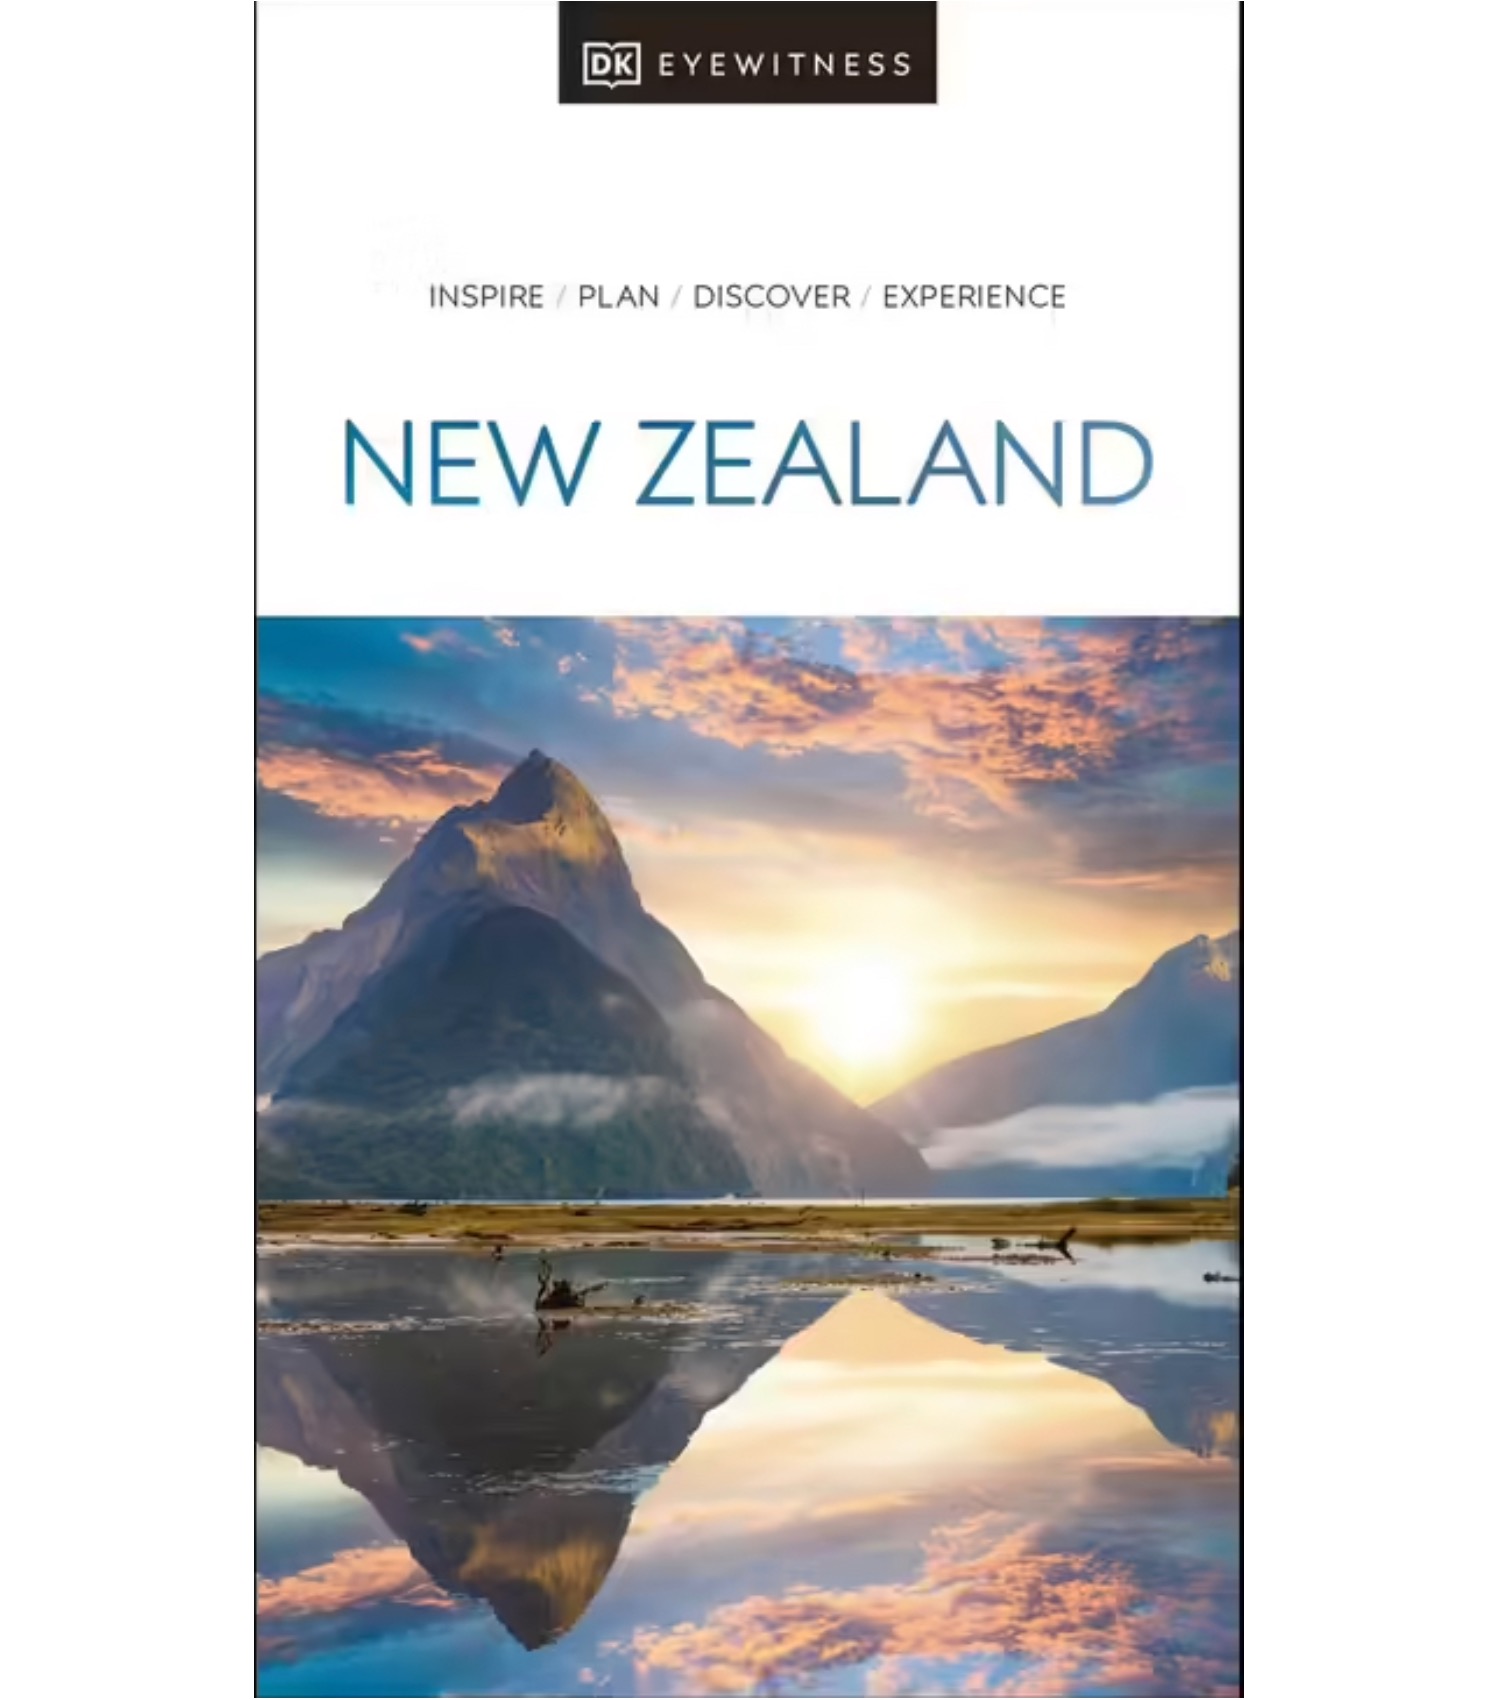 Eyewitness　Guide　DK　(9780241538760)　Travel　Eyewitness　Travel　11　New　DK　Zealand　Edition　by　Guides